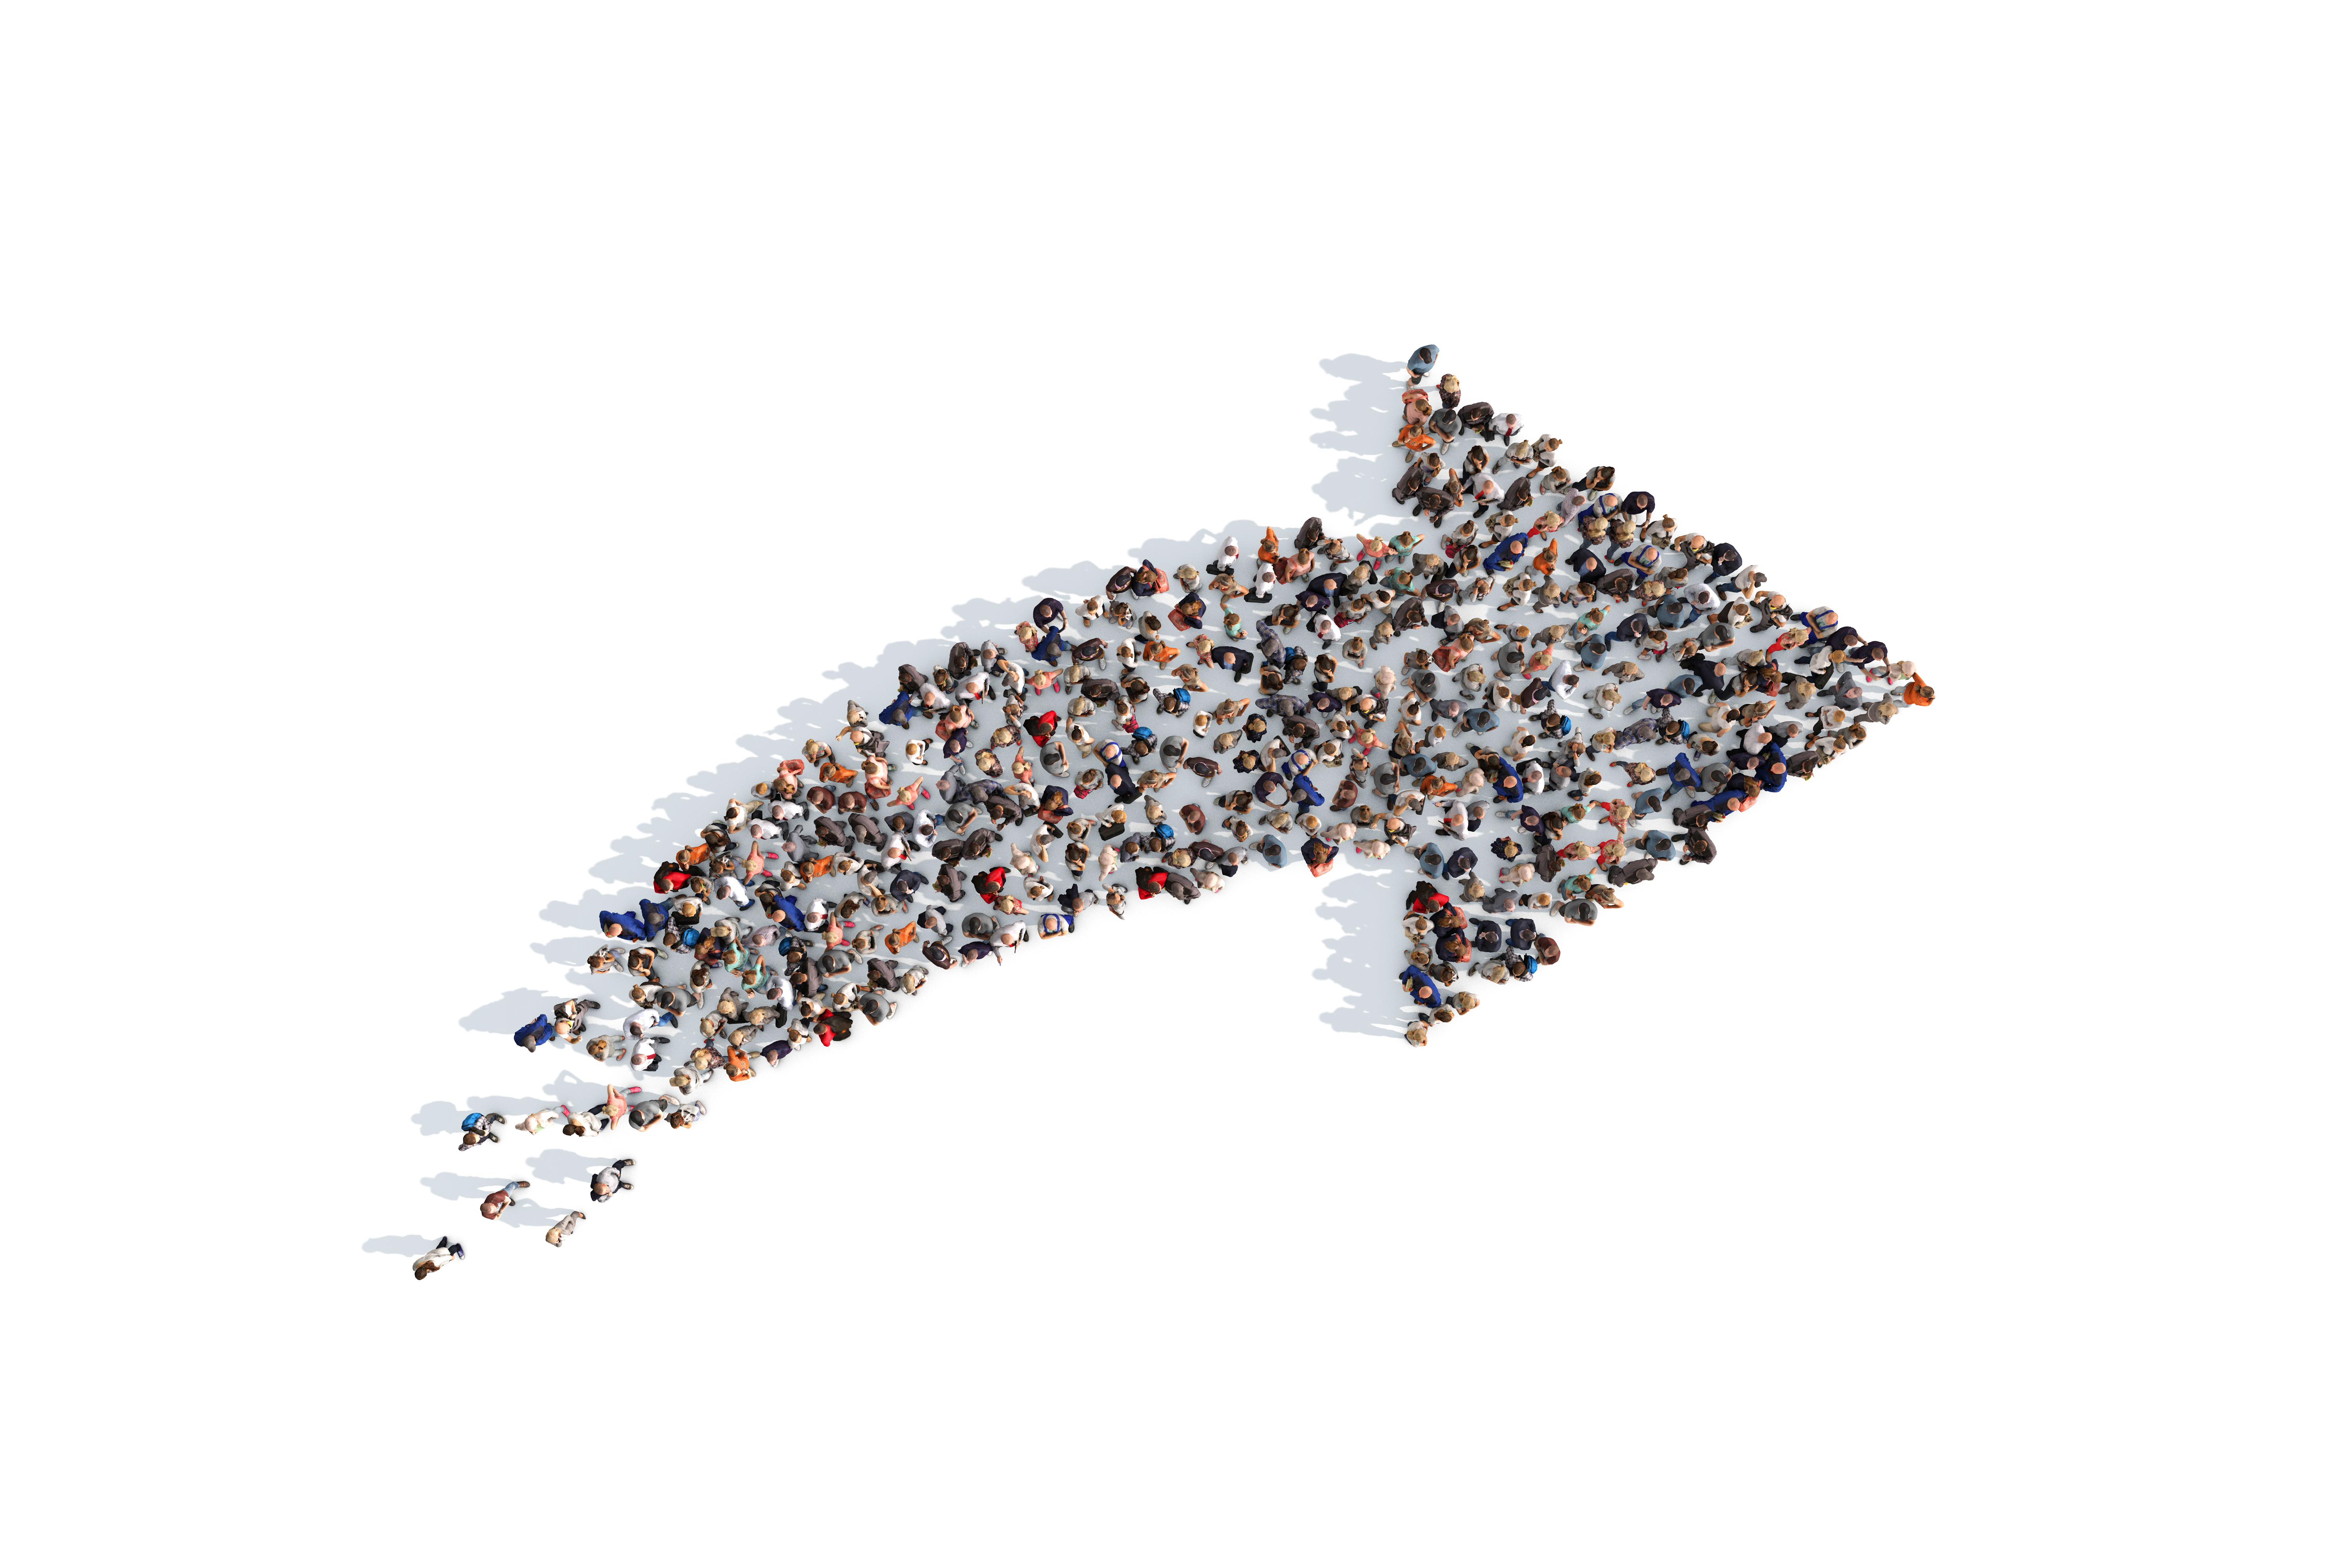 Large collection of people grouped together to form an arrow direction symbol